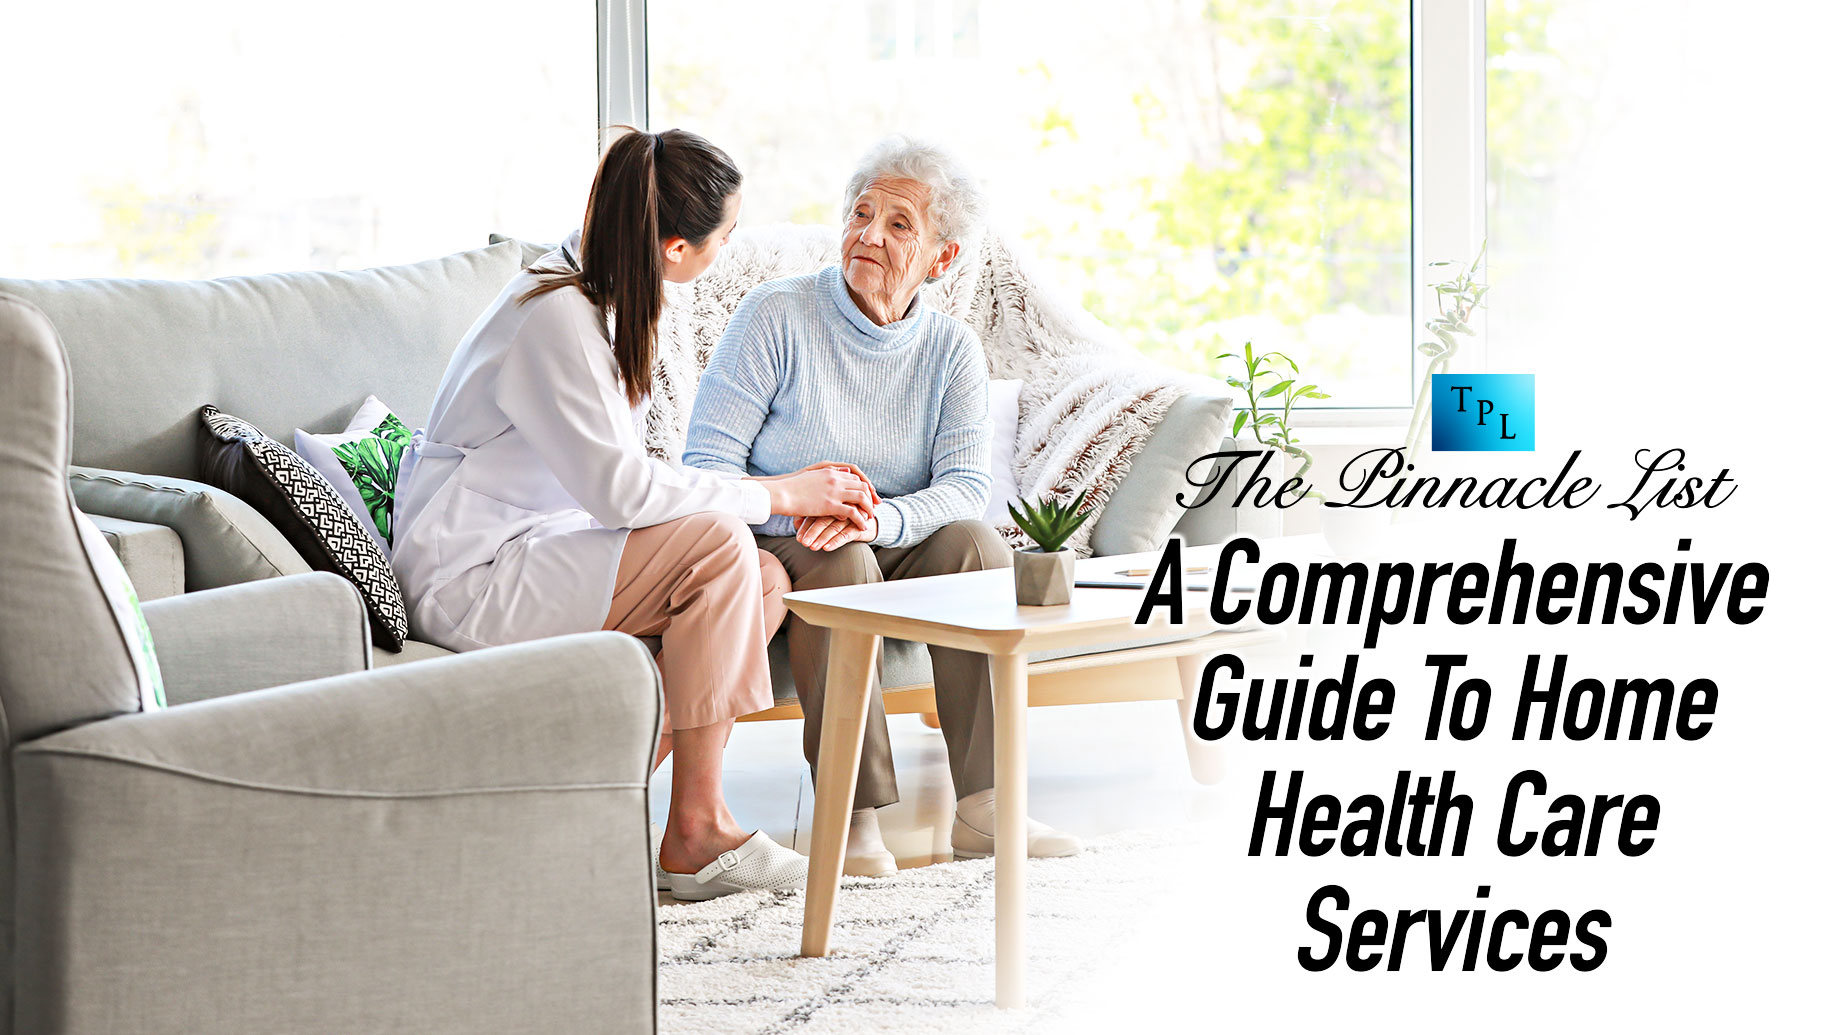 Compassionate Care At Home: A Comprehensive Guide To Home Health Care Services